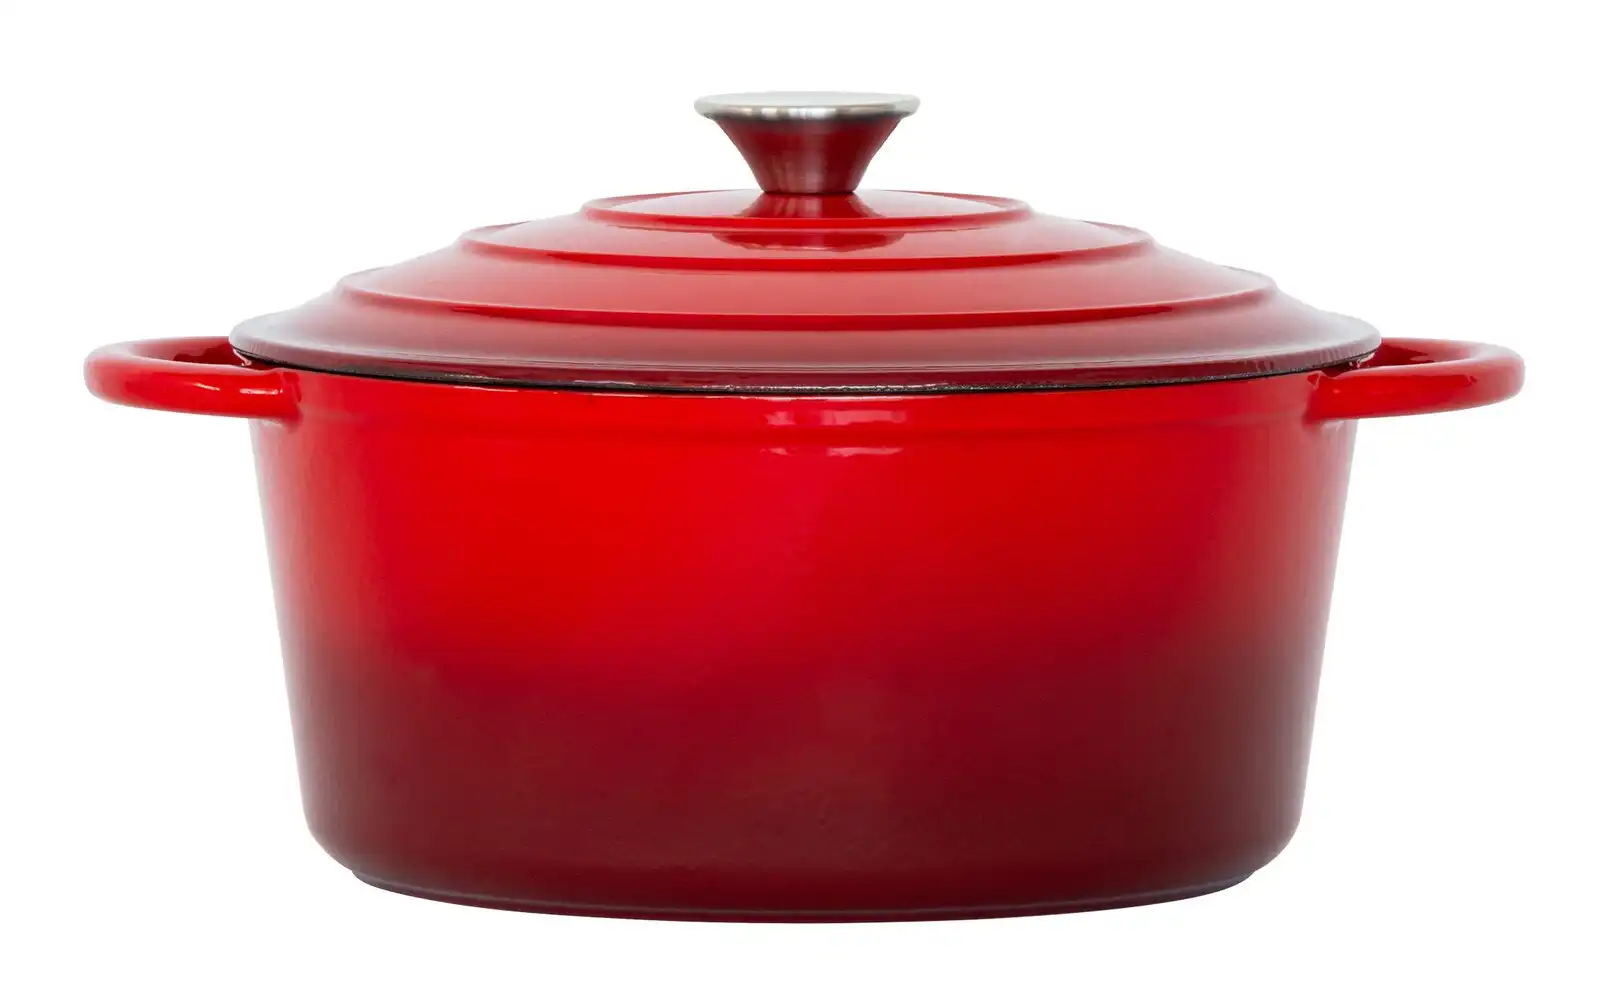 26cm Enamelled Cast Iron French Oven Casserole (4.7L) - Red